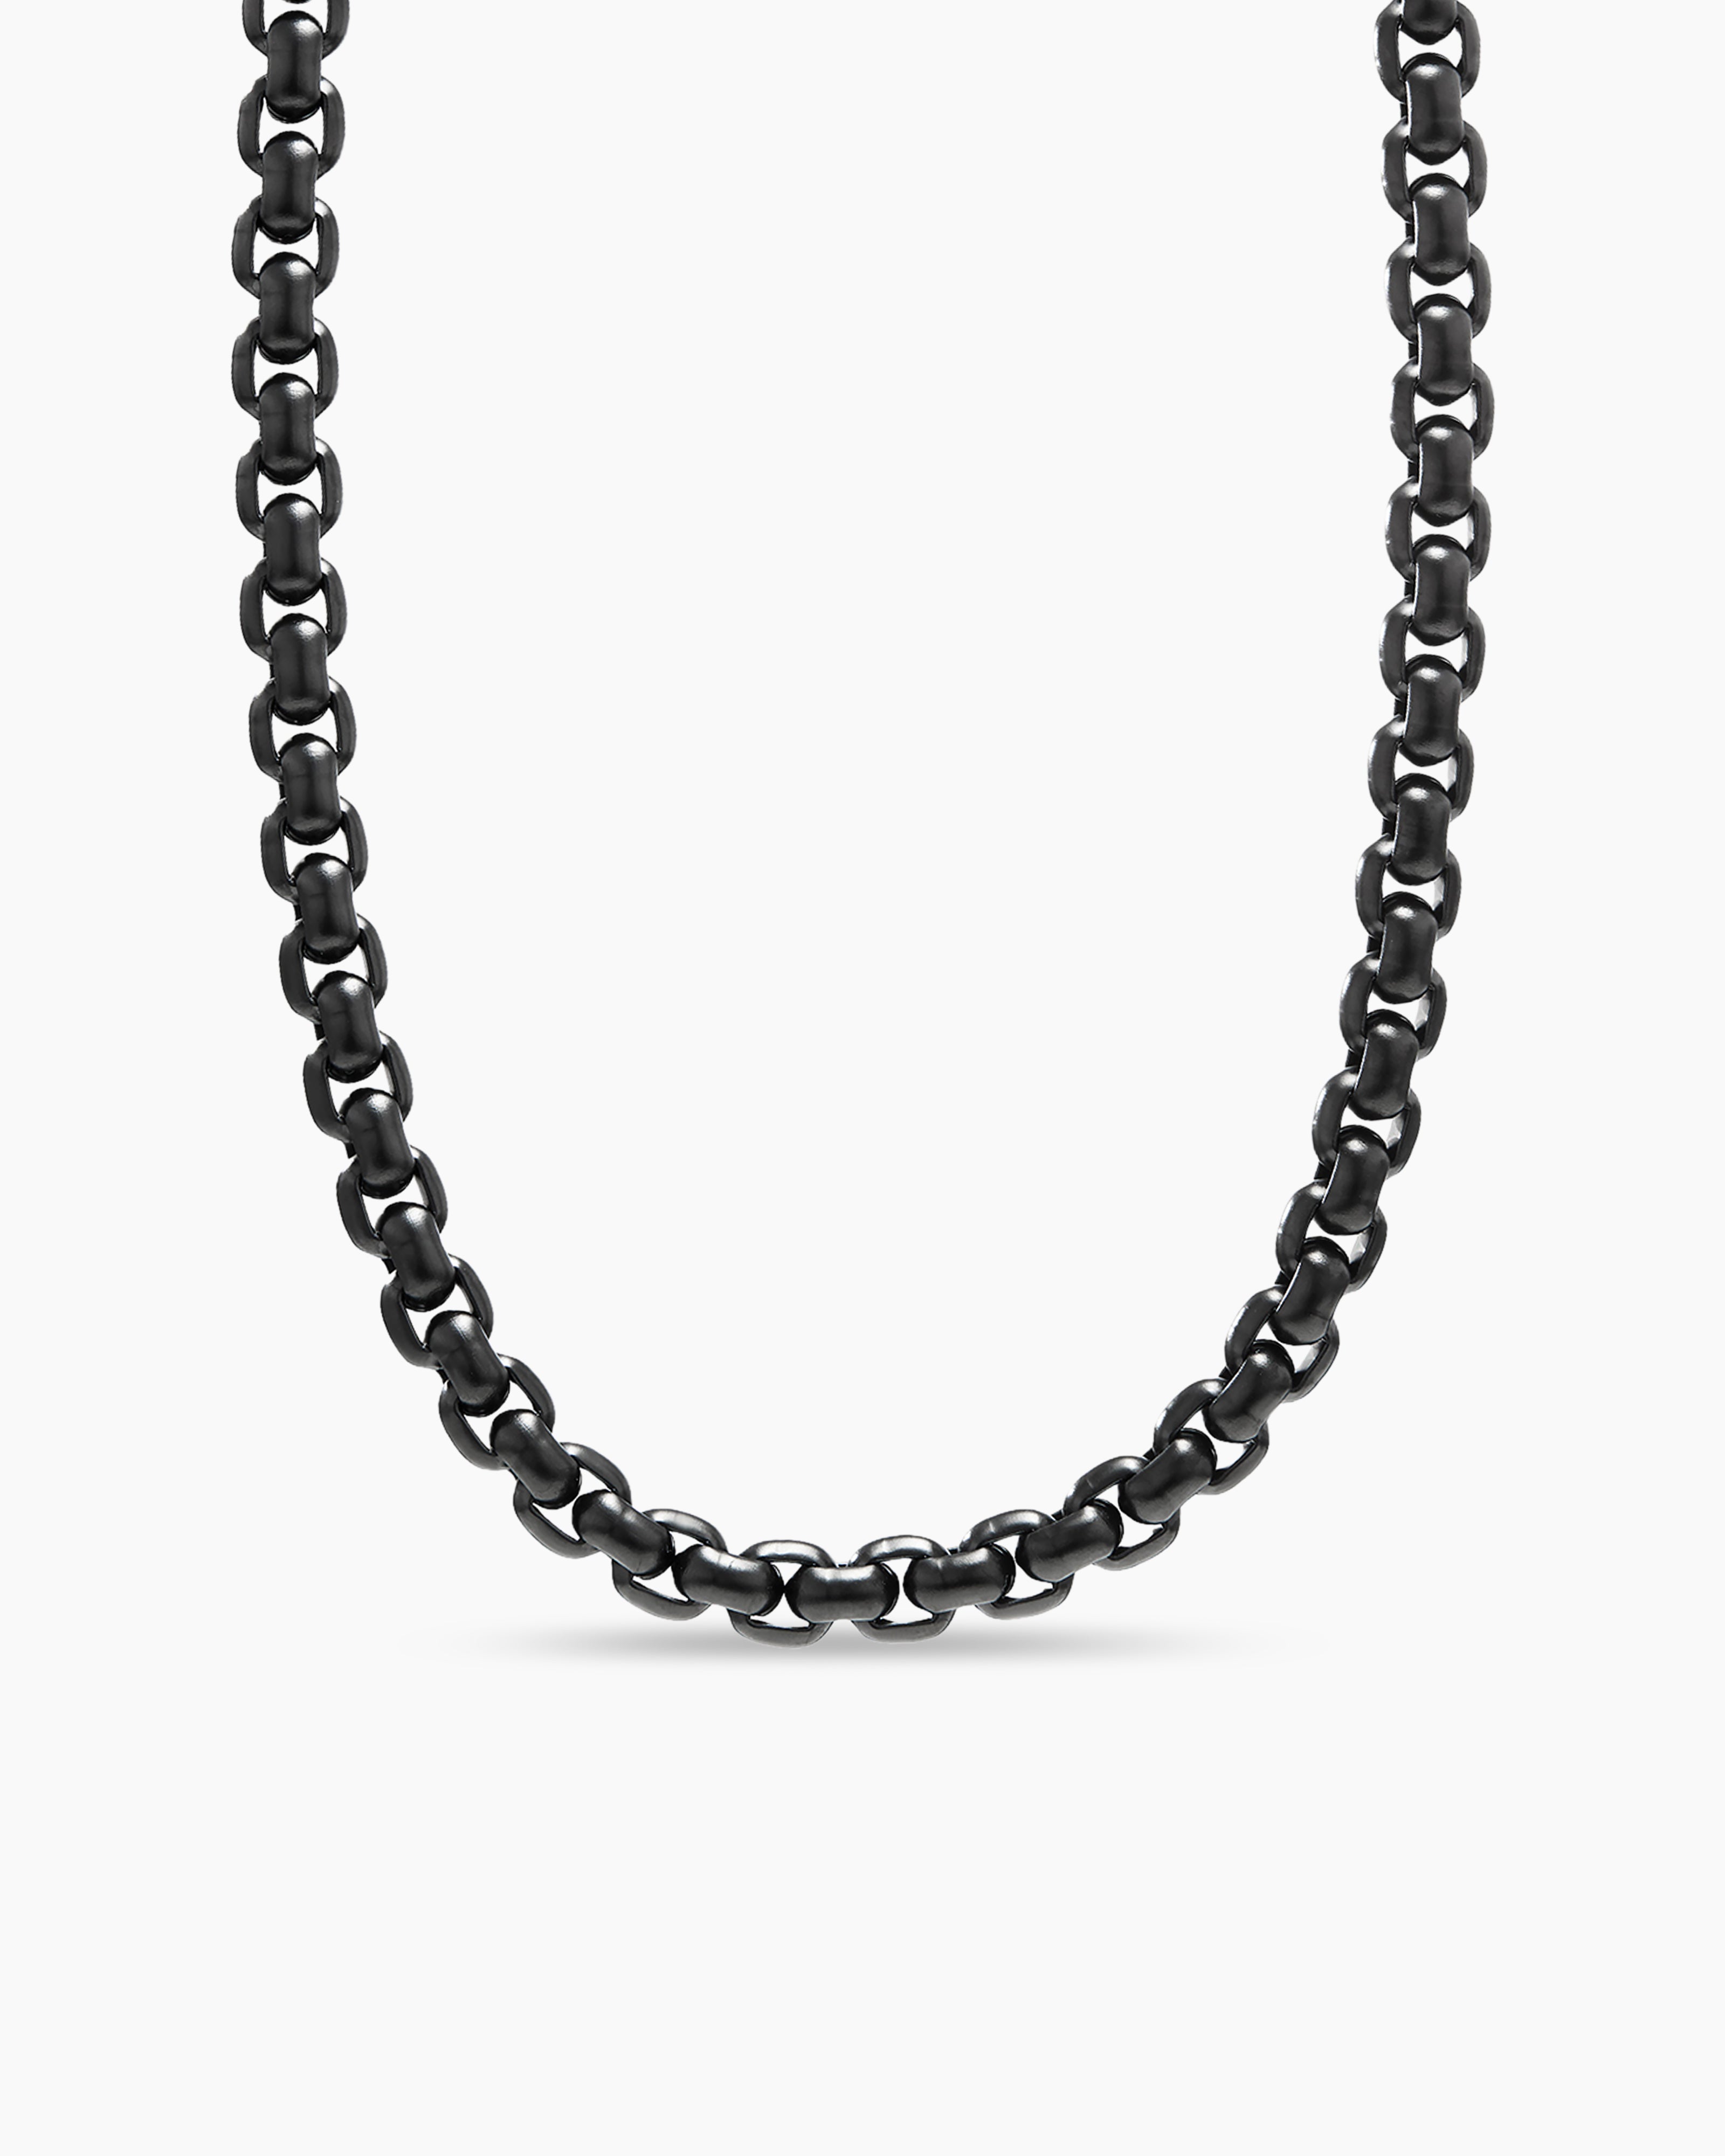 David Yurman Stainless Steel & Sterling Silver Box Chain Necklace, 22